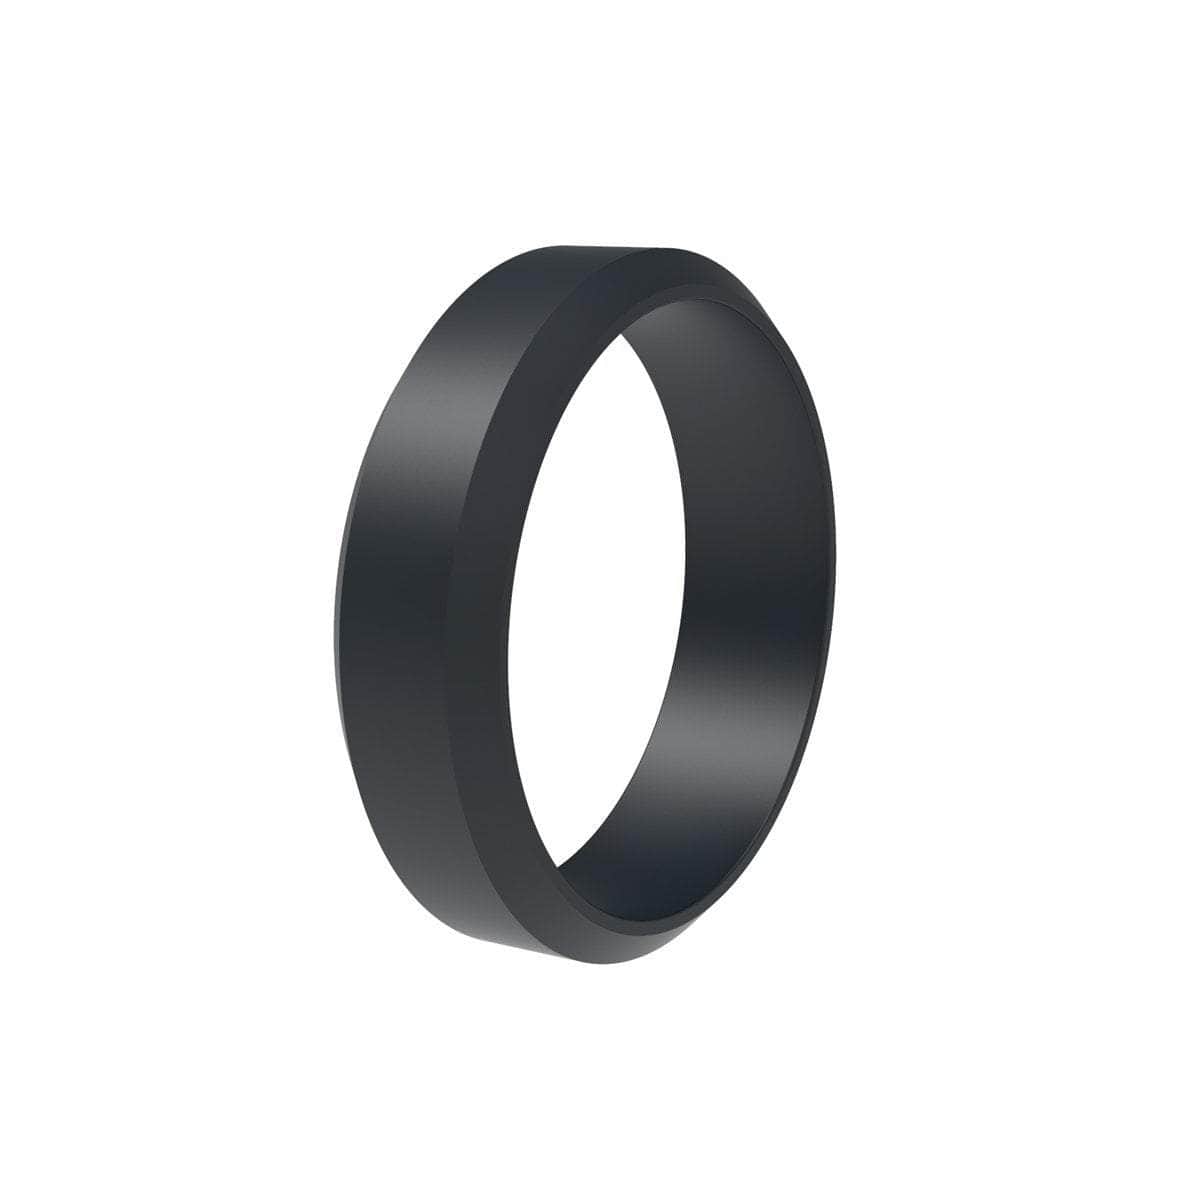 5 Best Silicone Wedding Bands for Women: